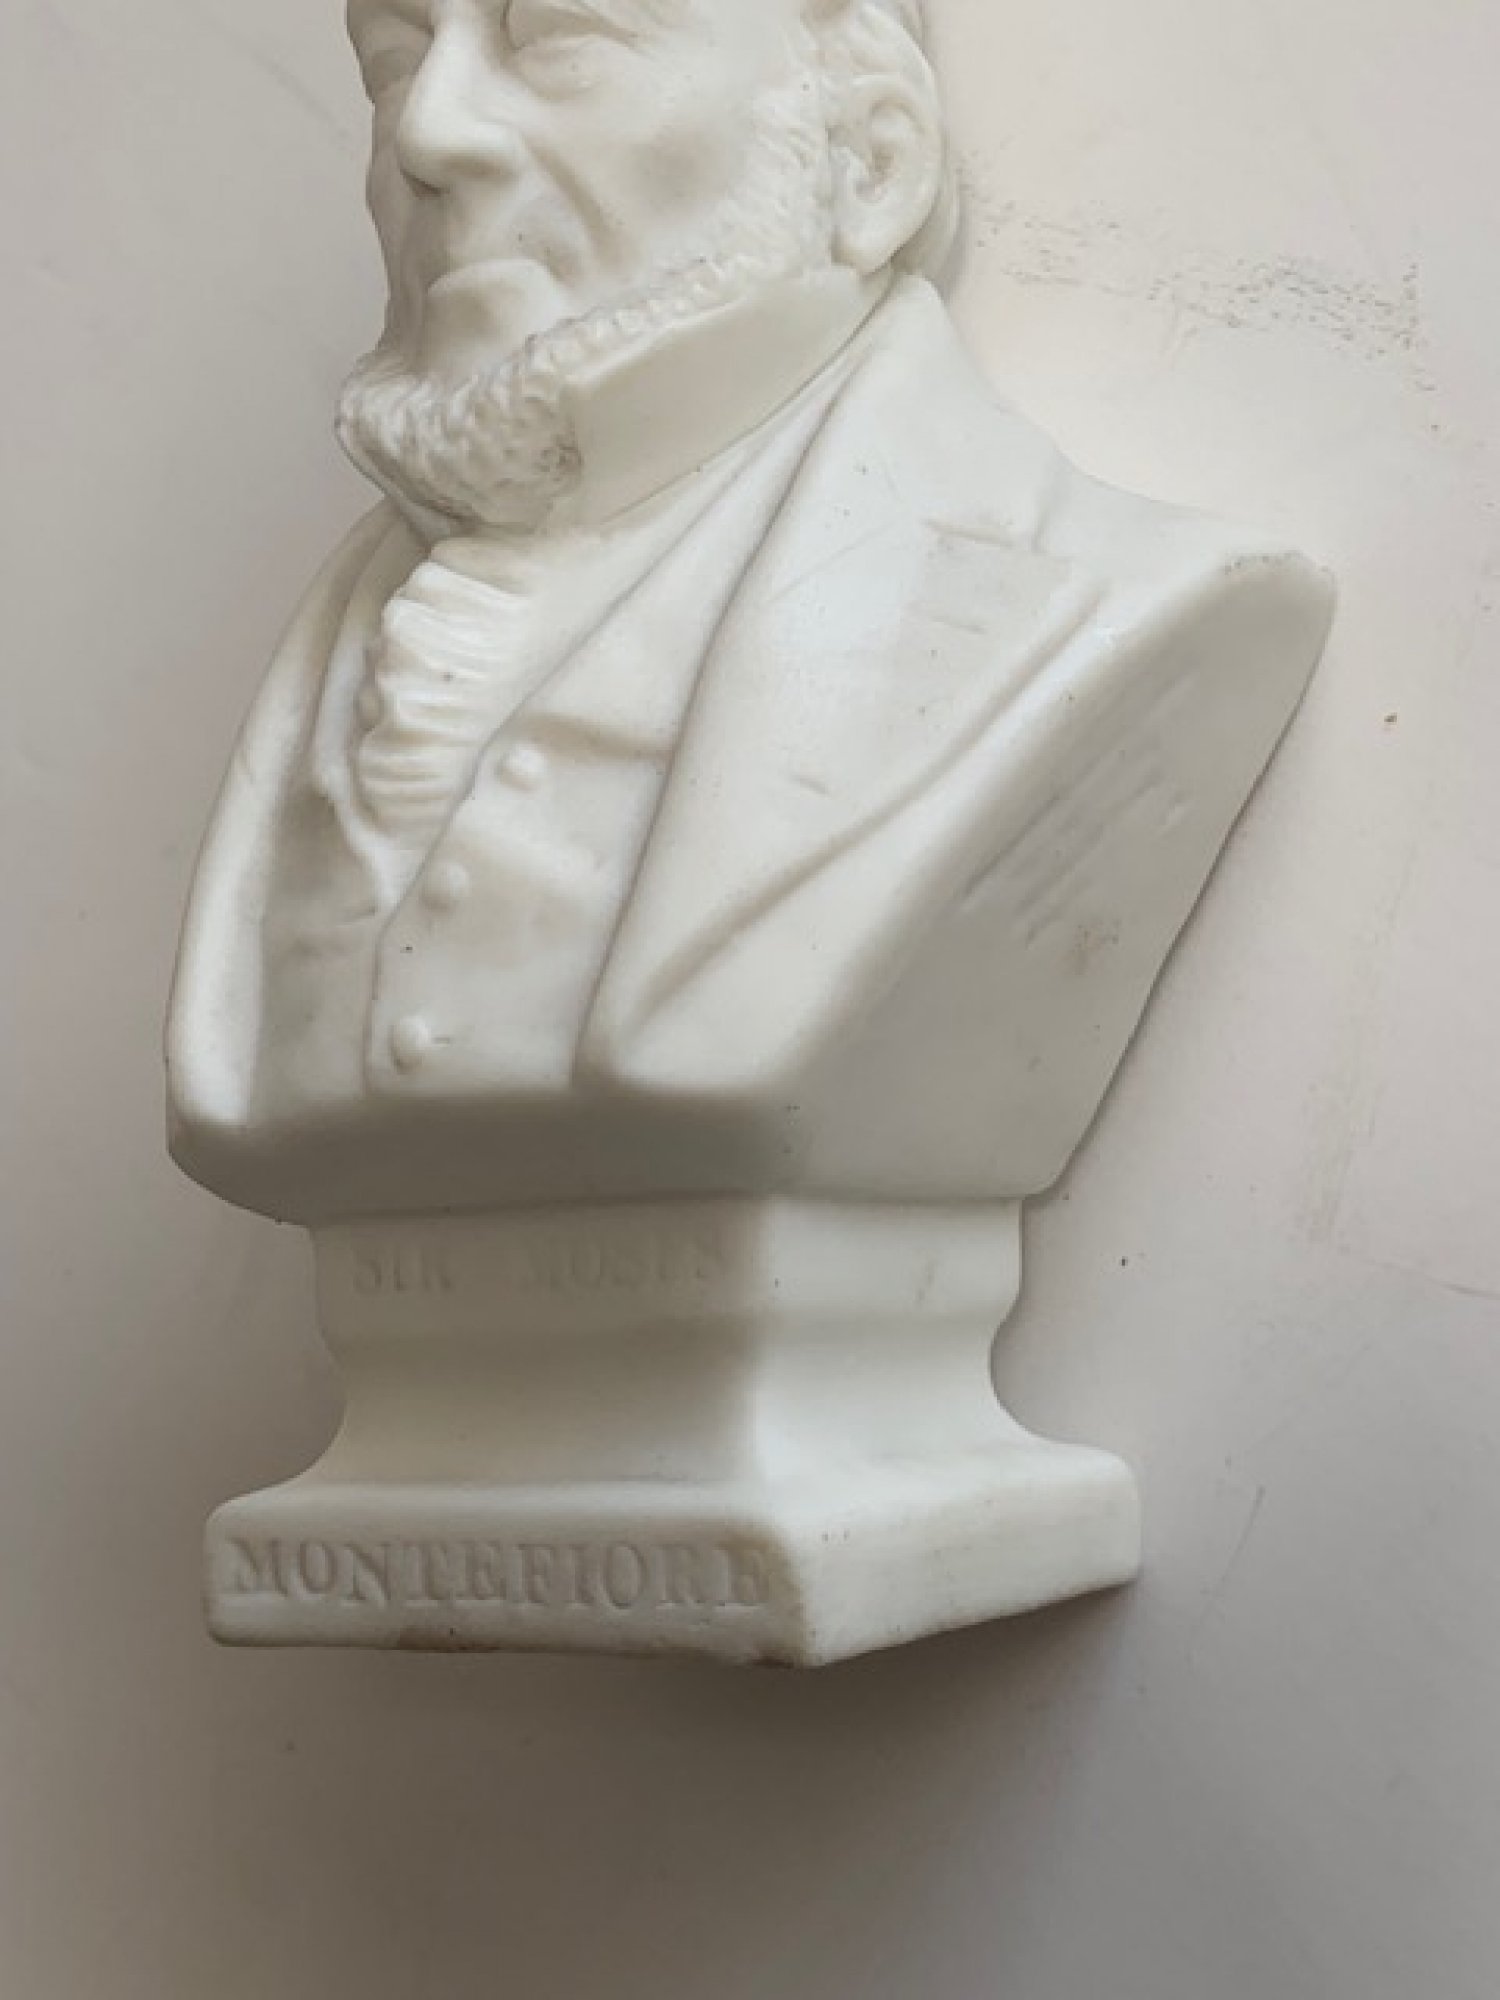 Sir Moses Montefiore pair of miniature parian busts